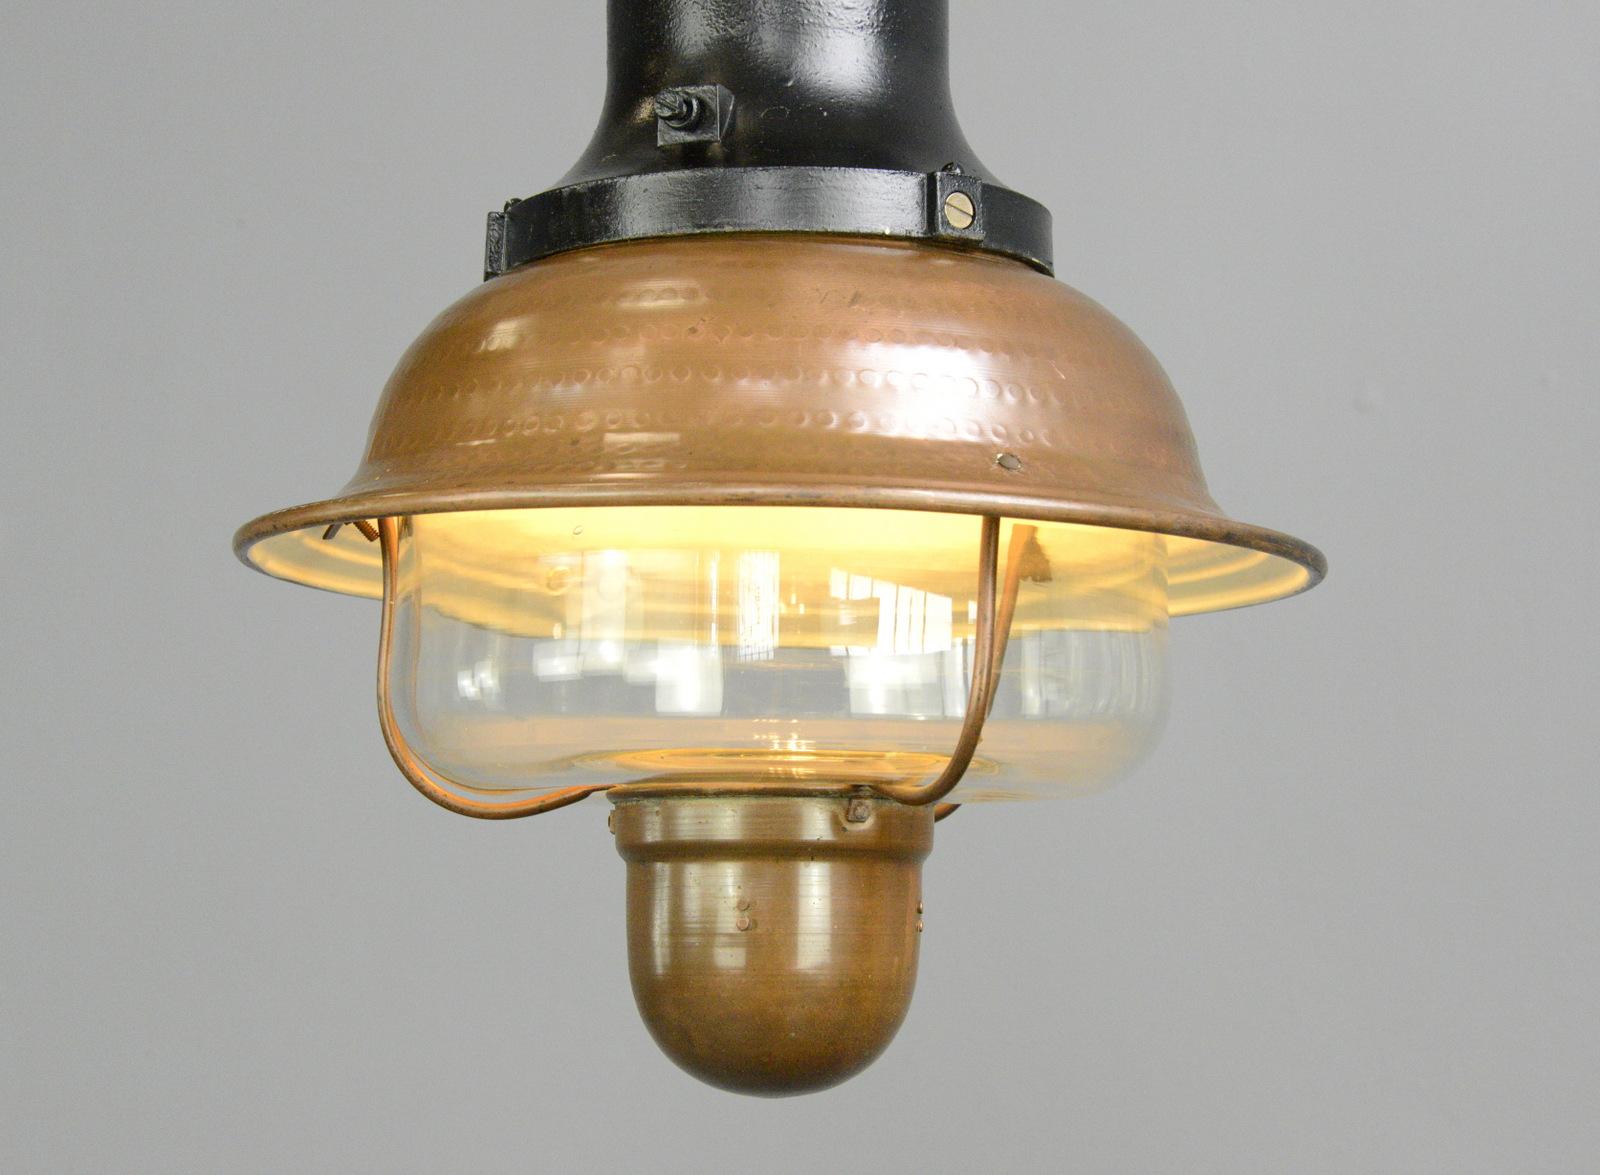 Copper train station light by Industria Rotterdam, circa 1920s

Glass diffuser
- Hammered copper shade
- Cast iron top
- Takes E27 fitting bulbs
- Comes with 100cm of cable and chain
- Made by Industria Rotterdam
- Dutch, 1930s
- Measures: